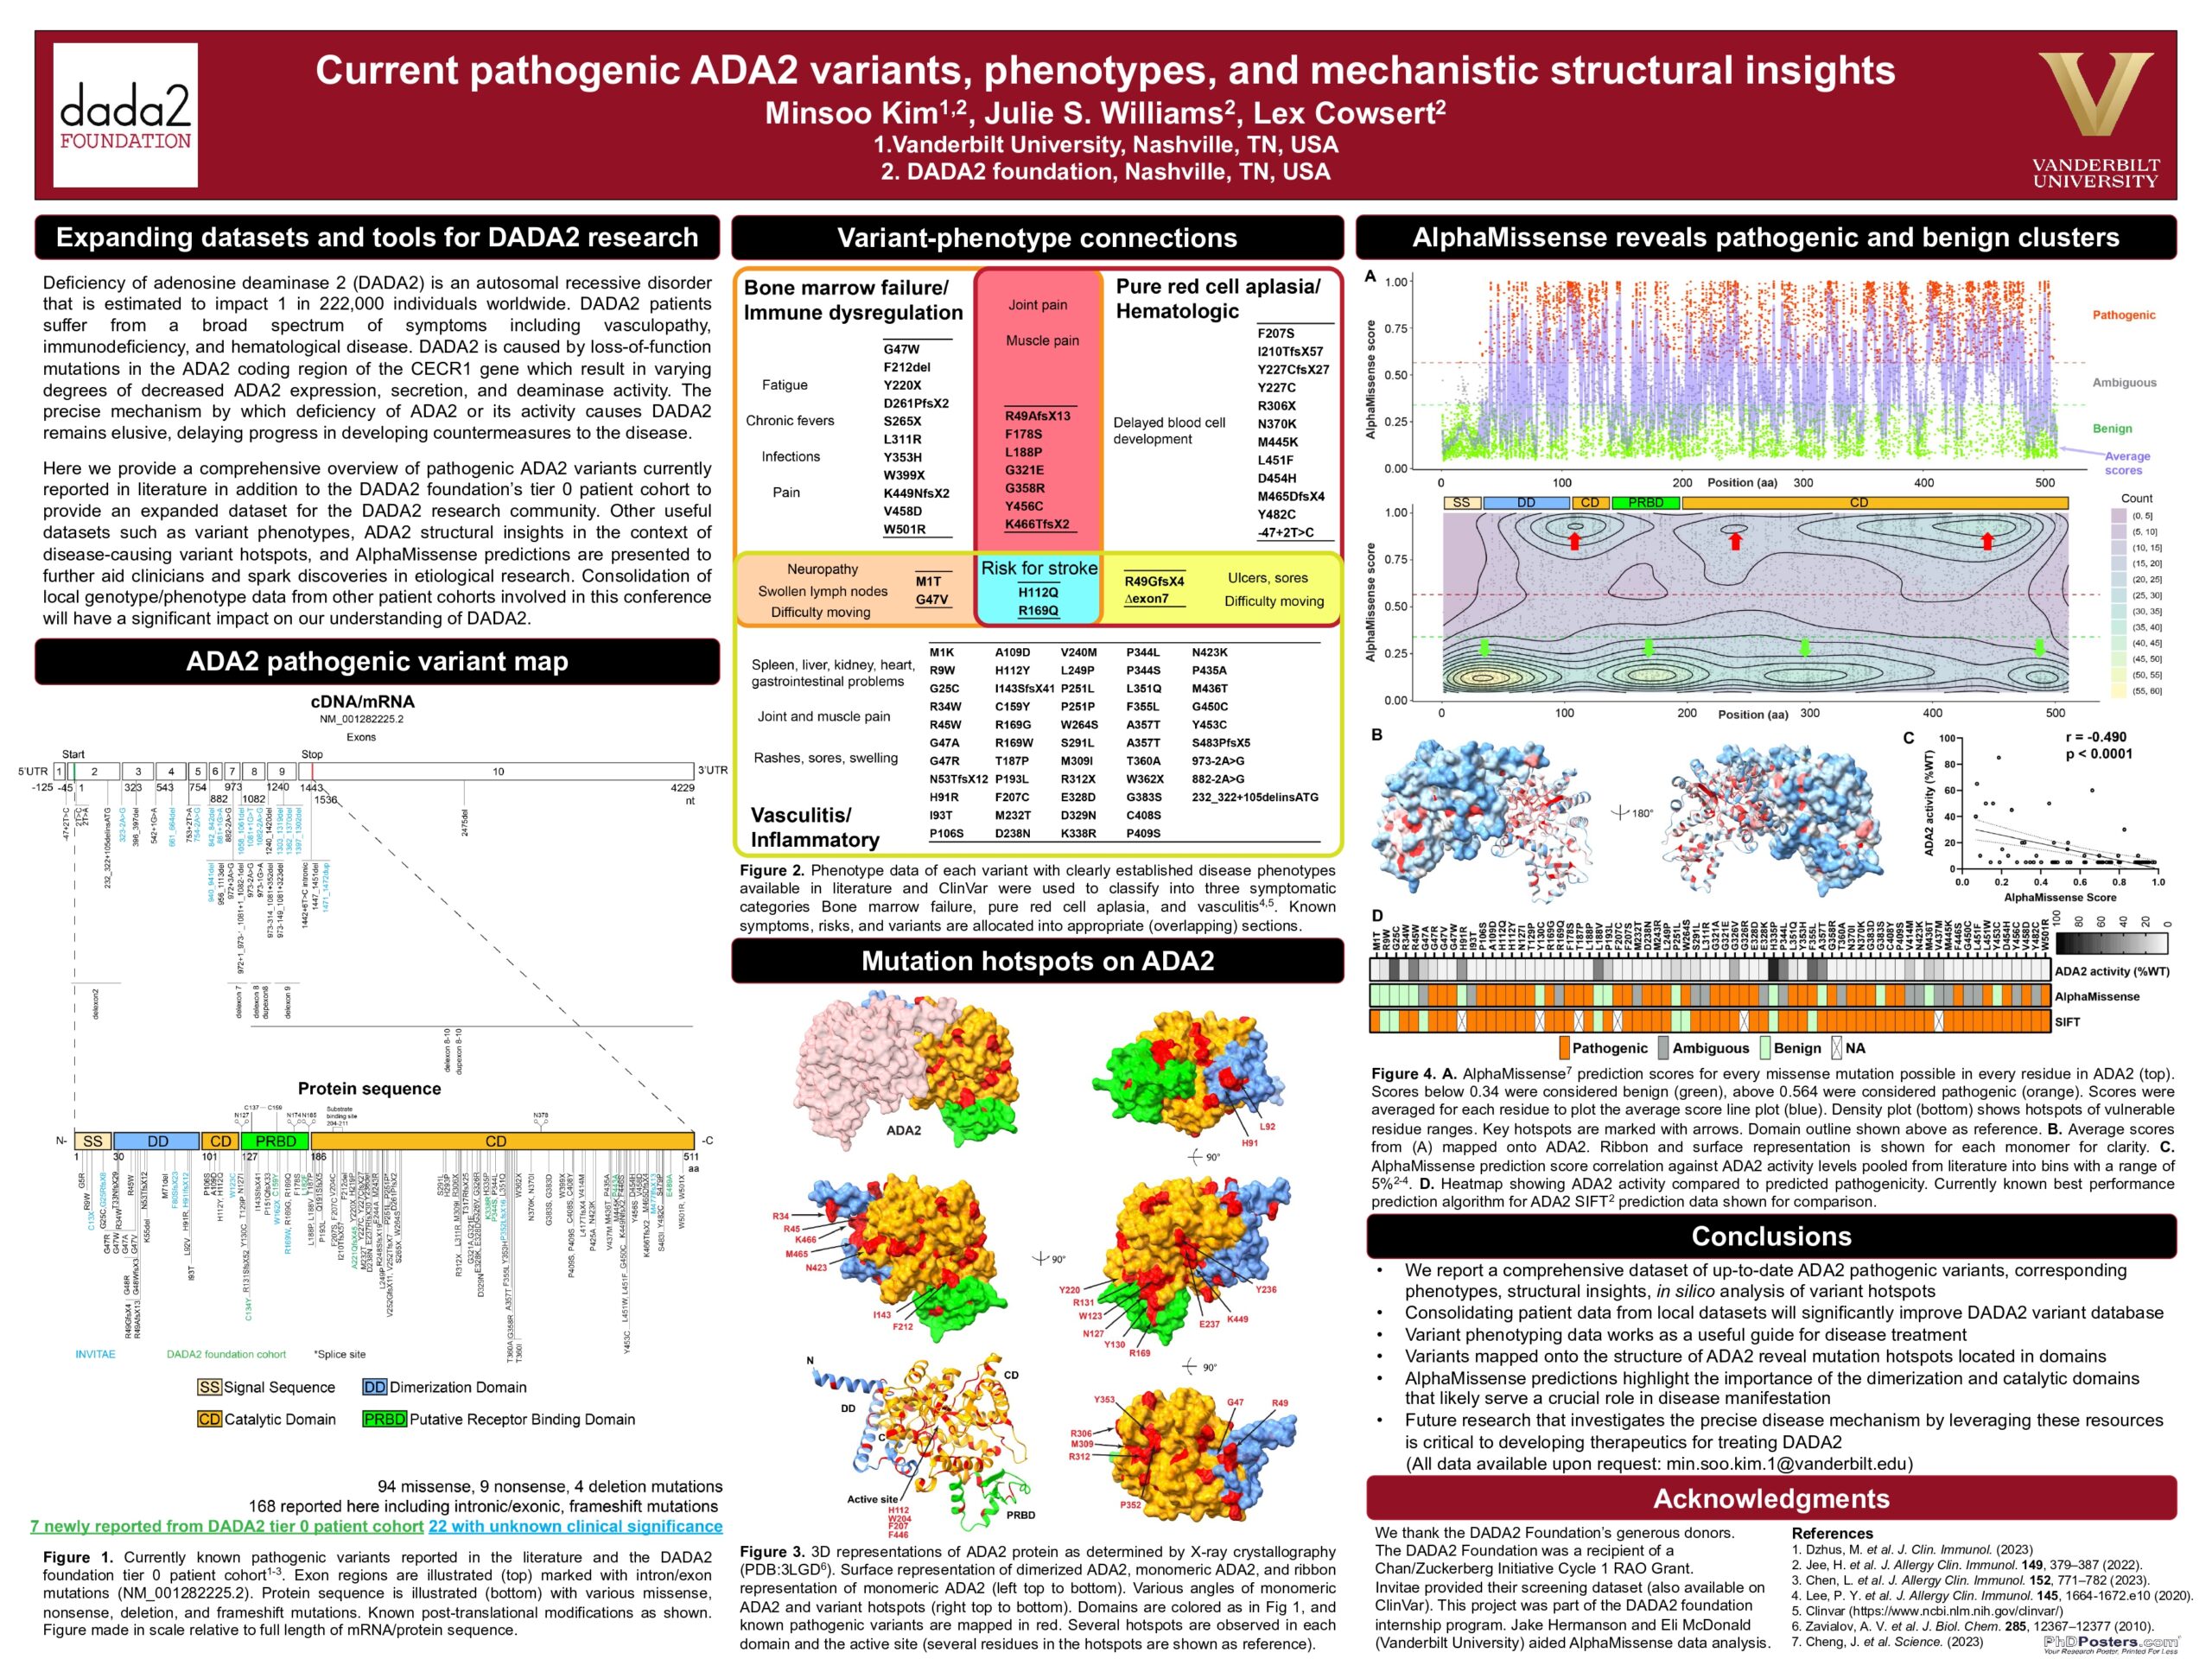 Min Soo Kim - Current pathogenic ADA2 variants, phenotypes, and mechanistic structural insights